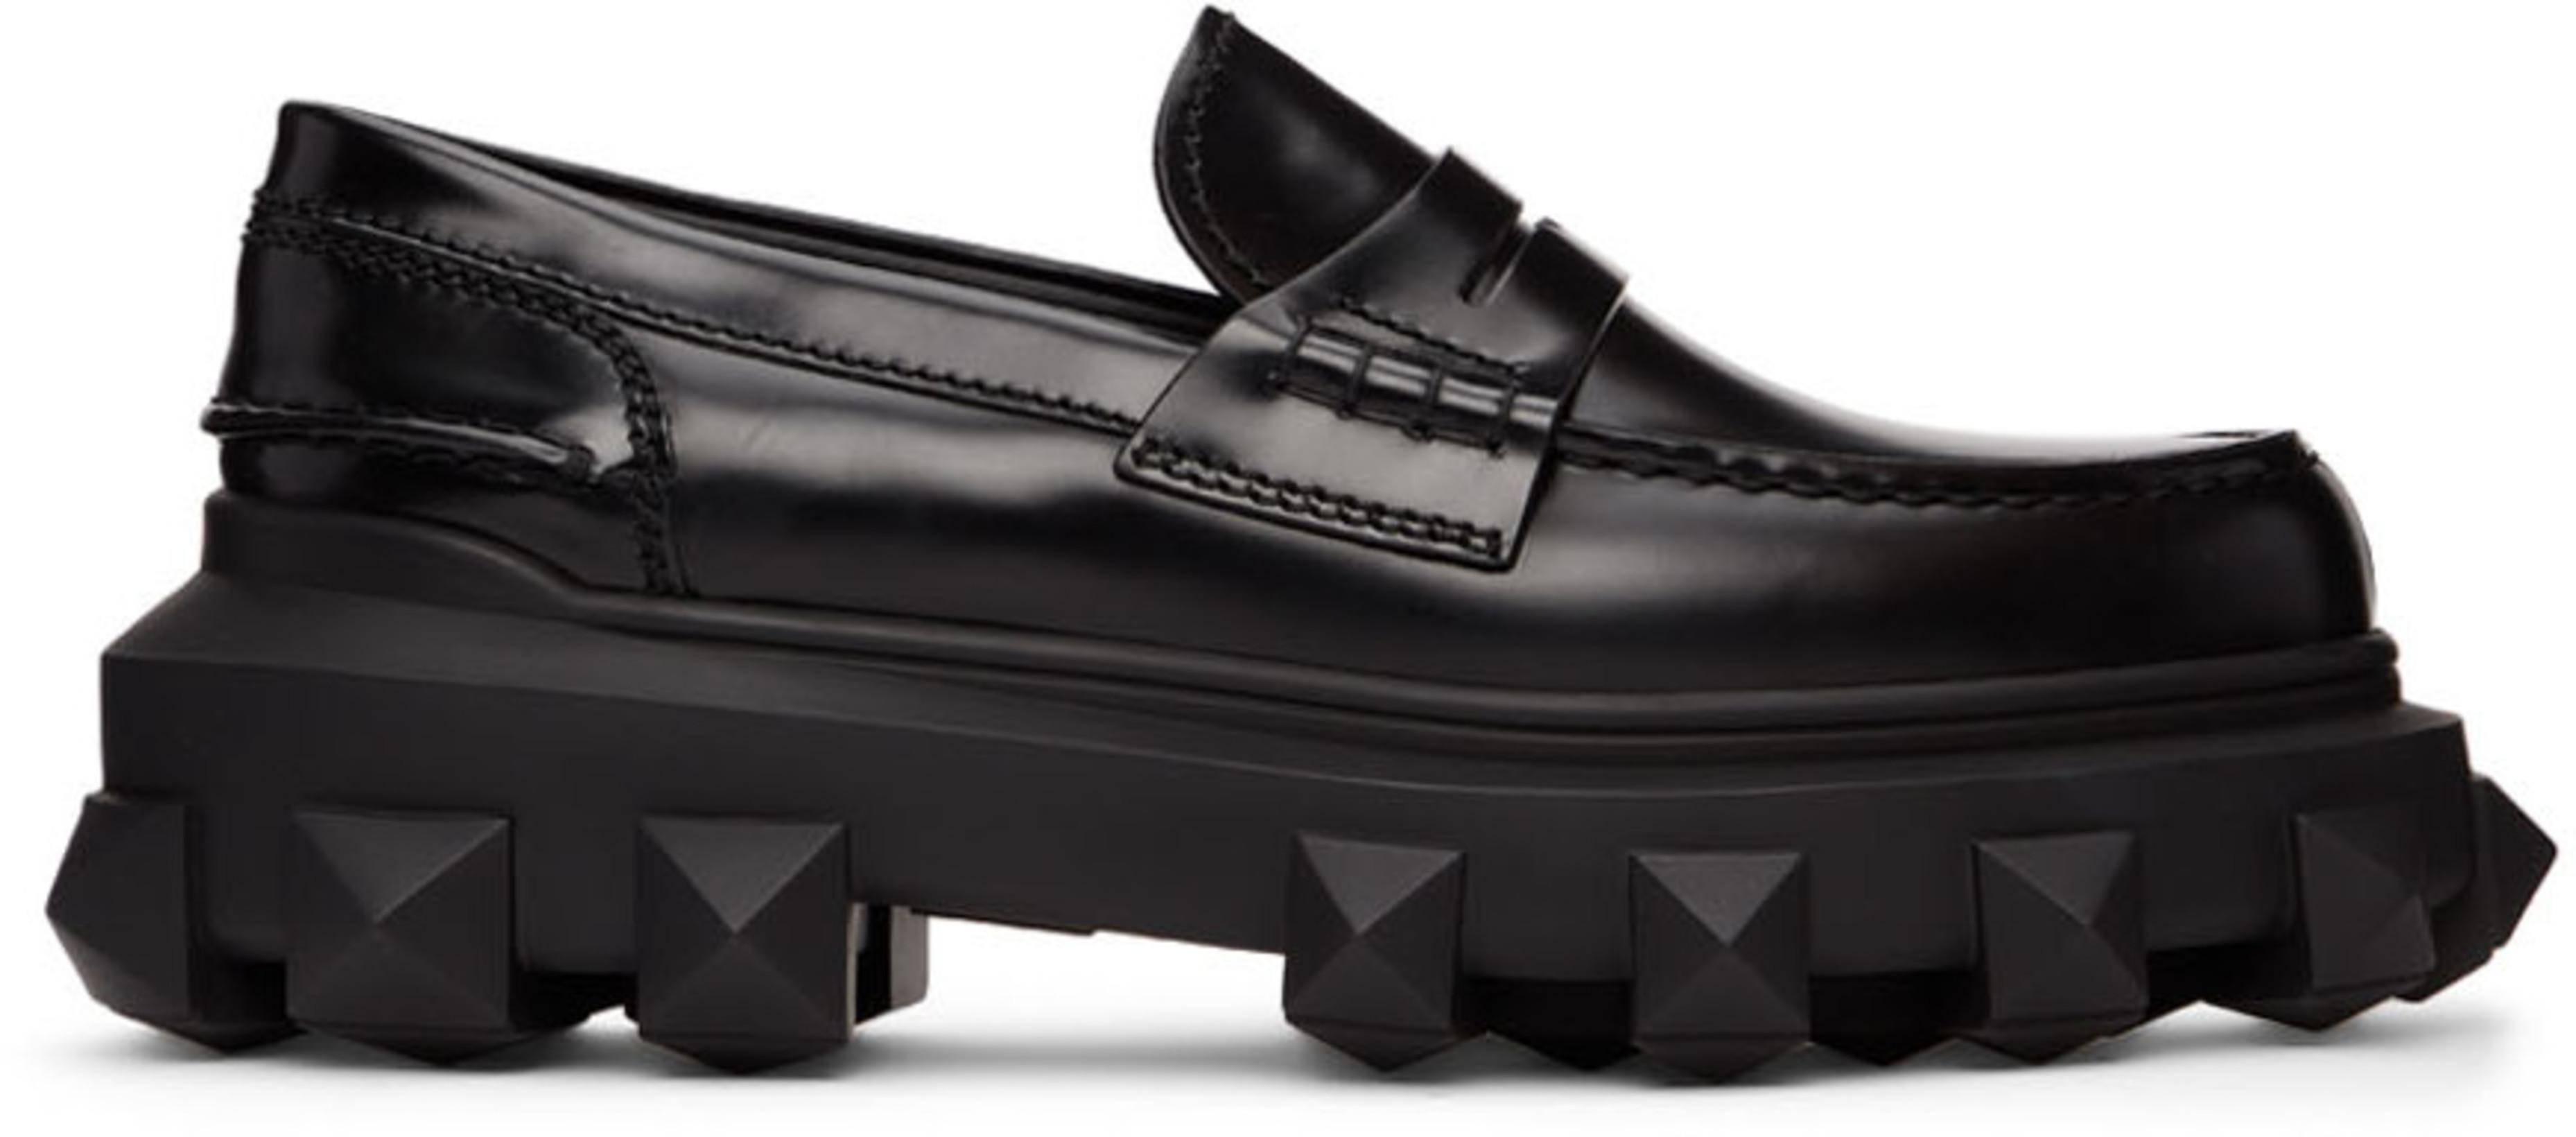 Black Brushed Calfskin Trackstud Loafers by VALENTINO